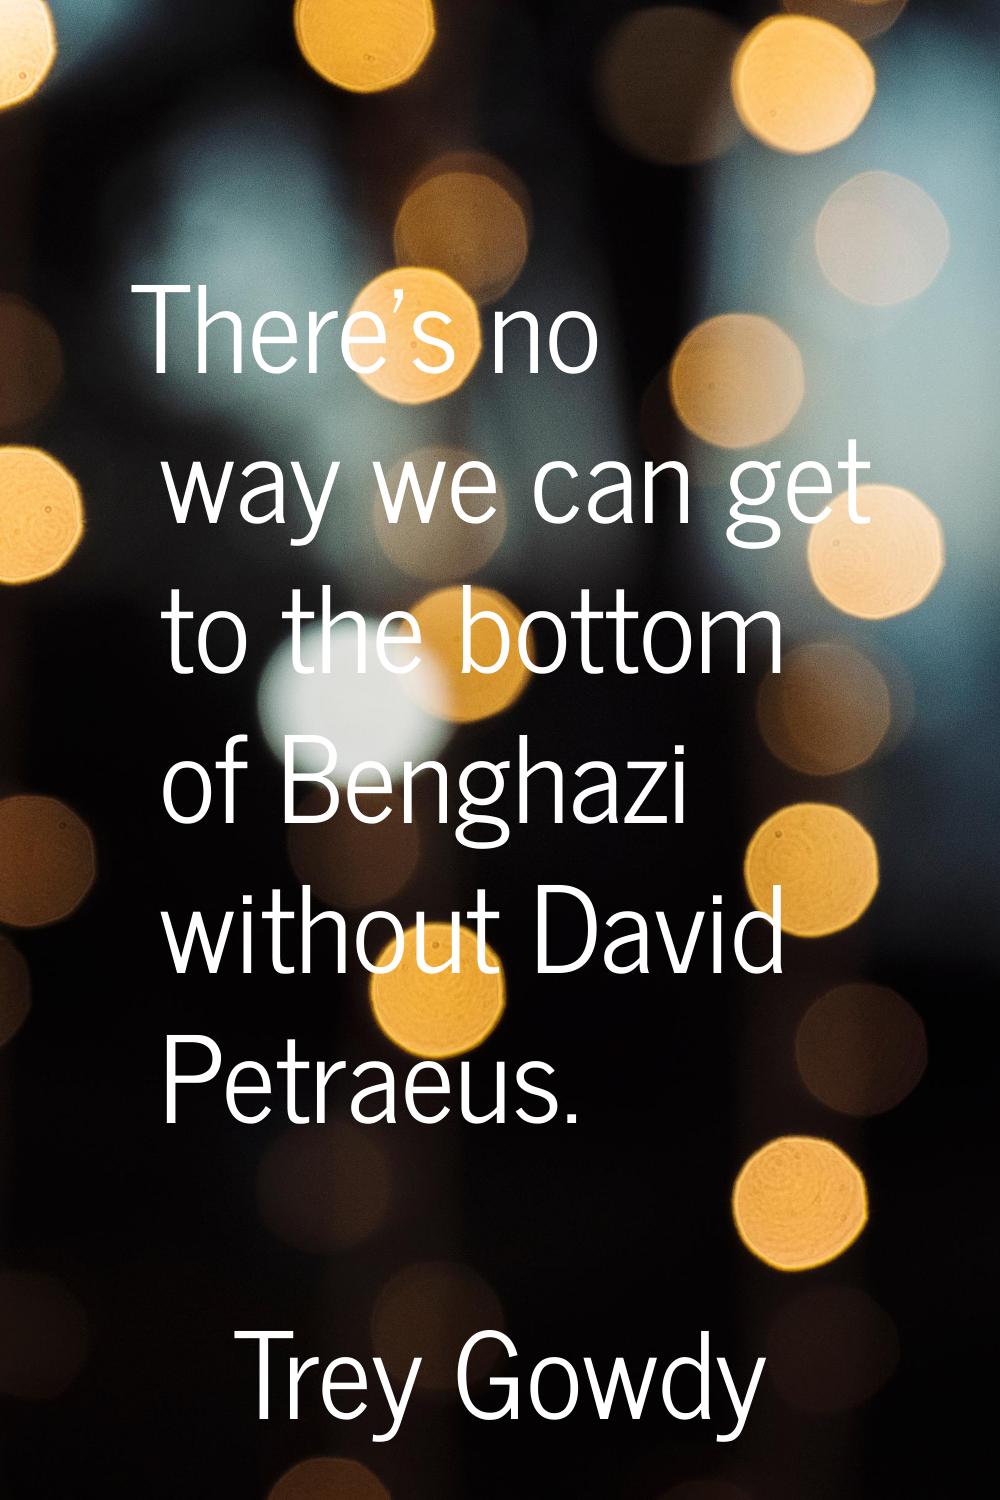 There's no way we can get to the bottom of Benghazi without David Petraeus.